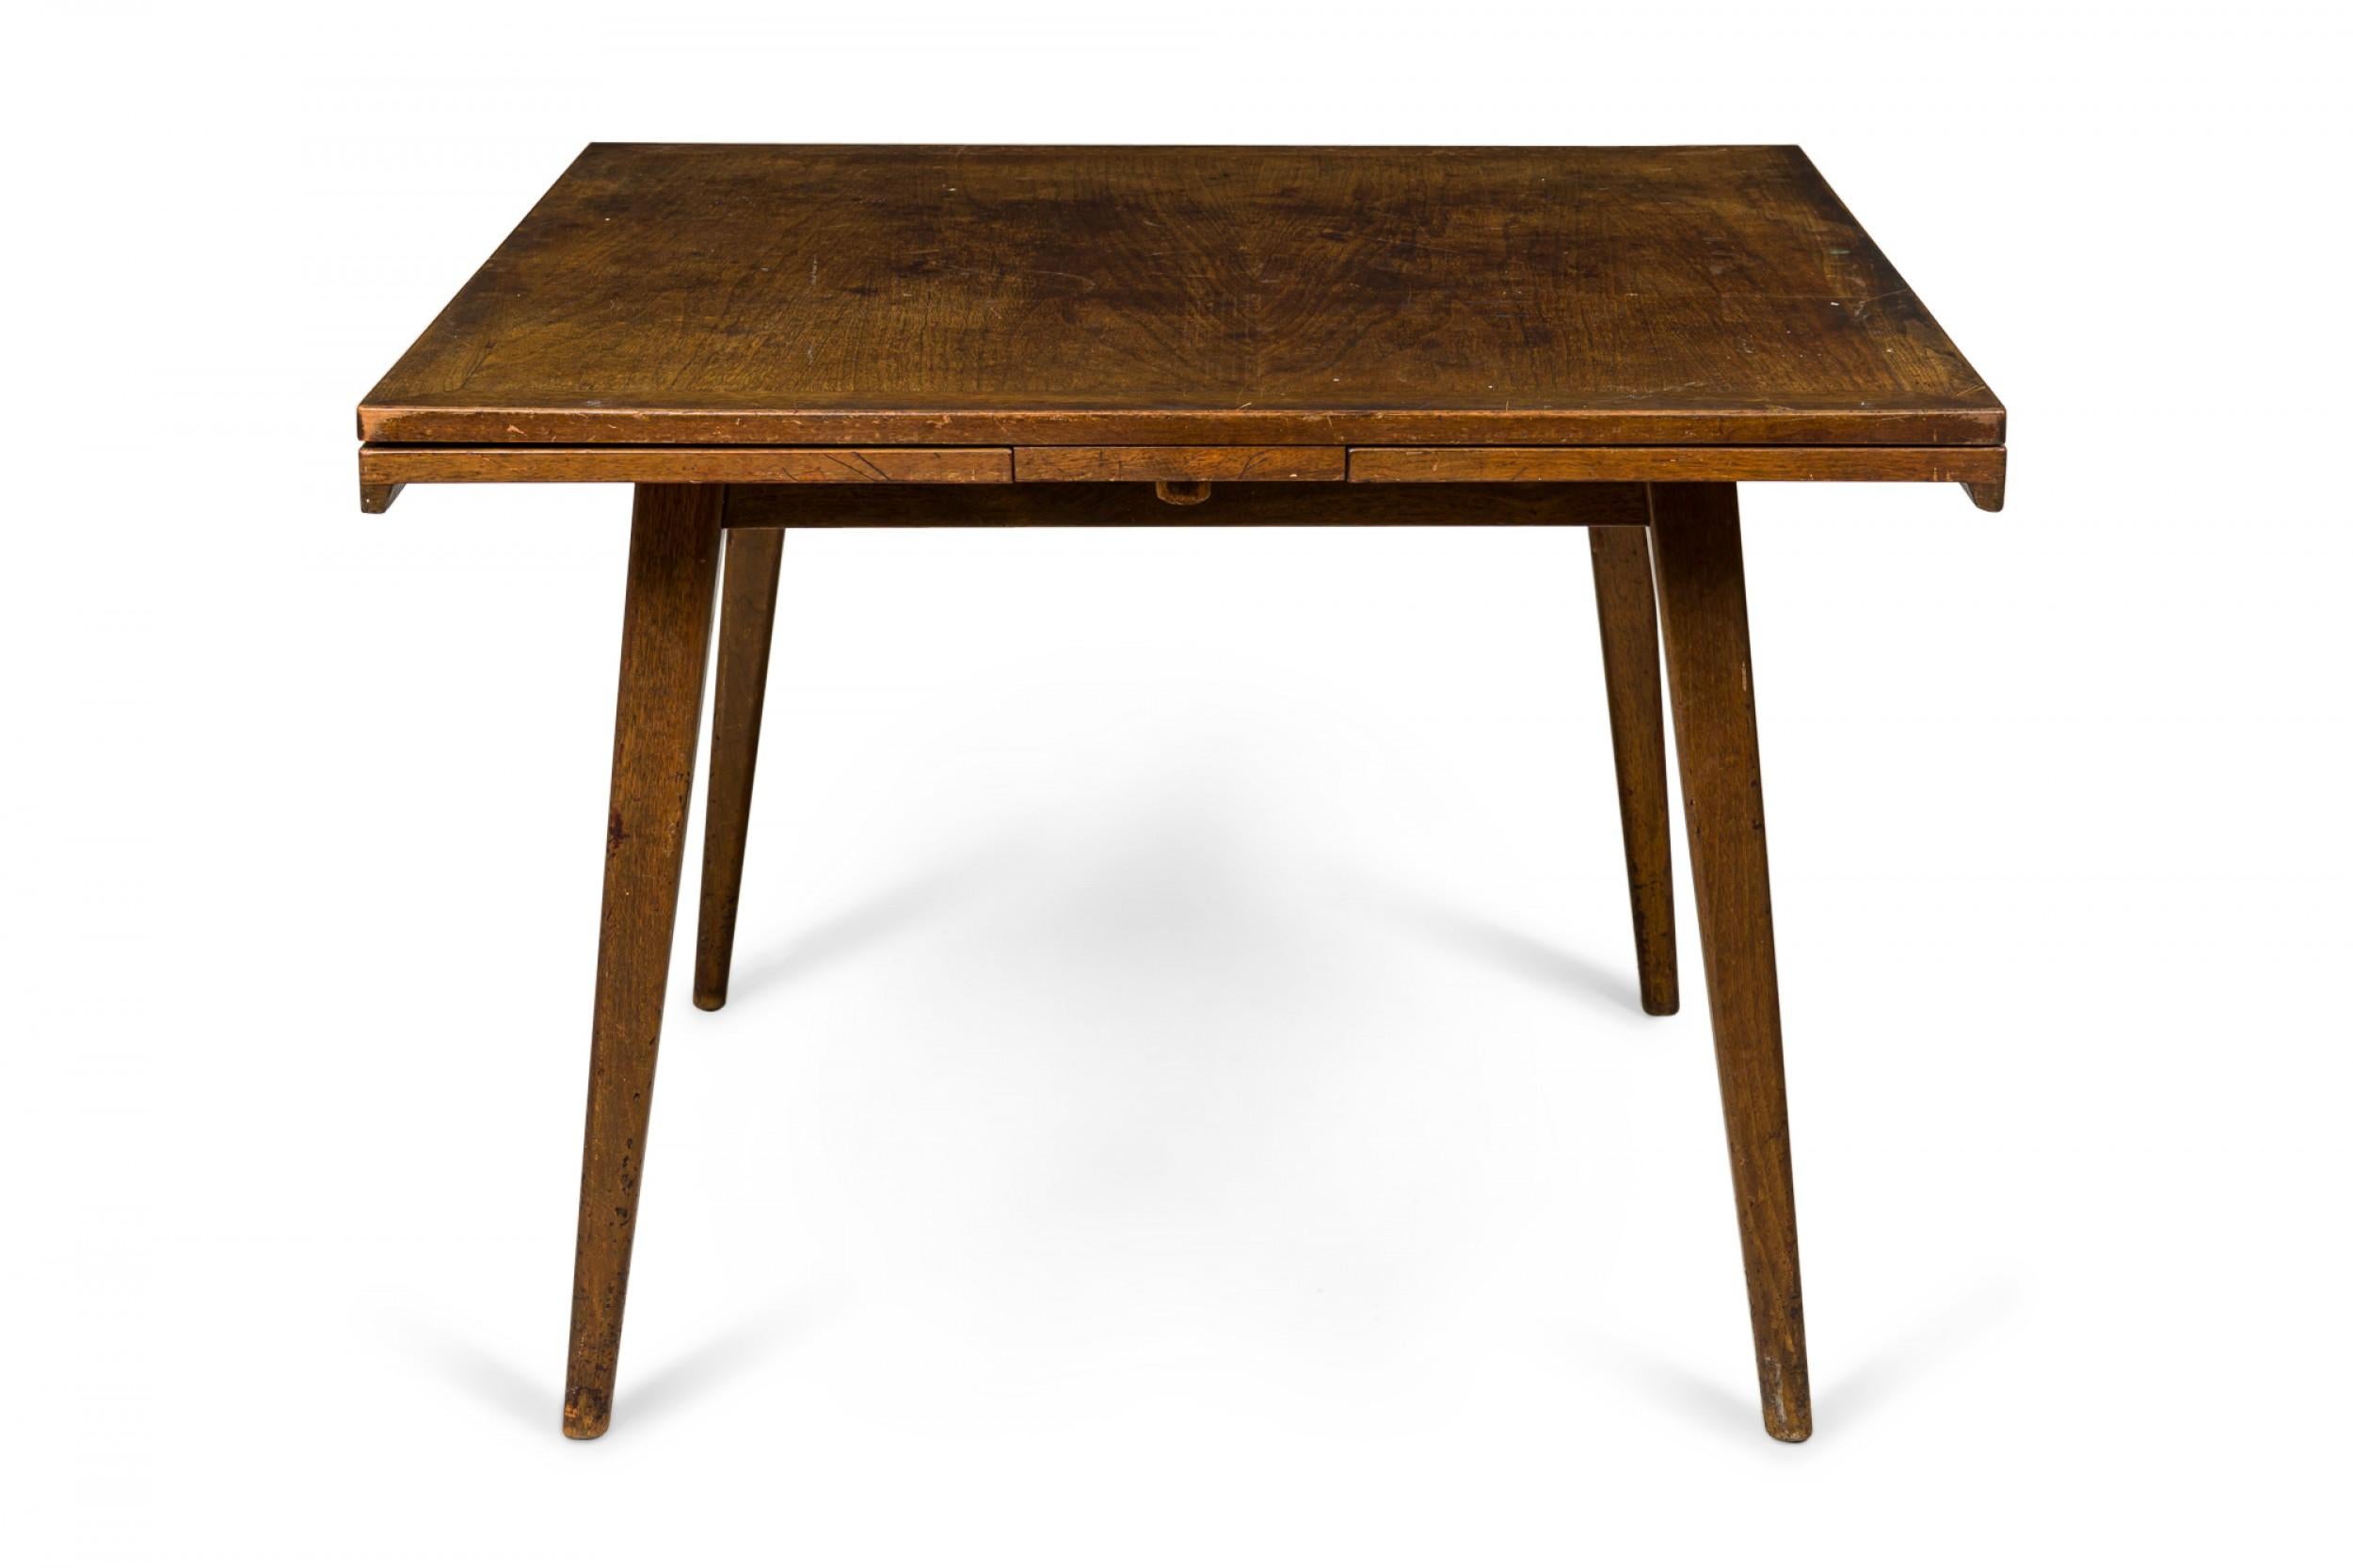 Danish Mid-Century walnut draw leaf dining table with a square top that pulls open from two sides to expand the table top surface, resting on four tapered dowel legs. (JENS RISOM)
